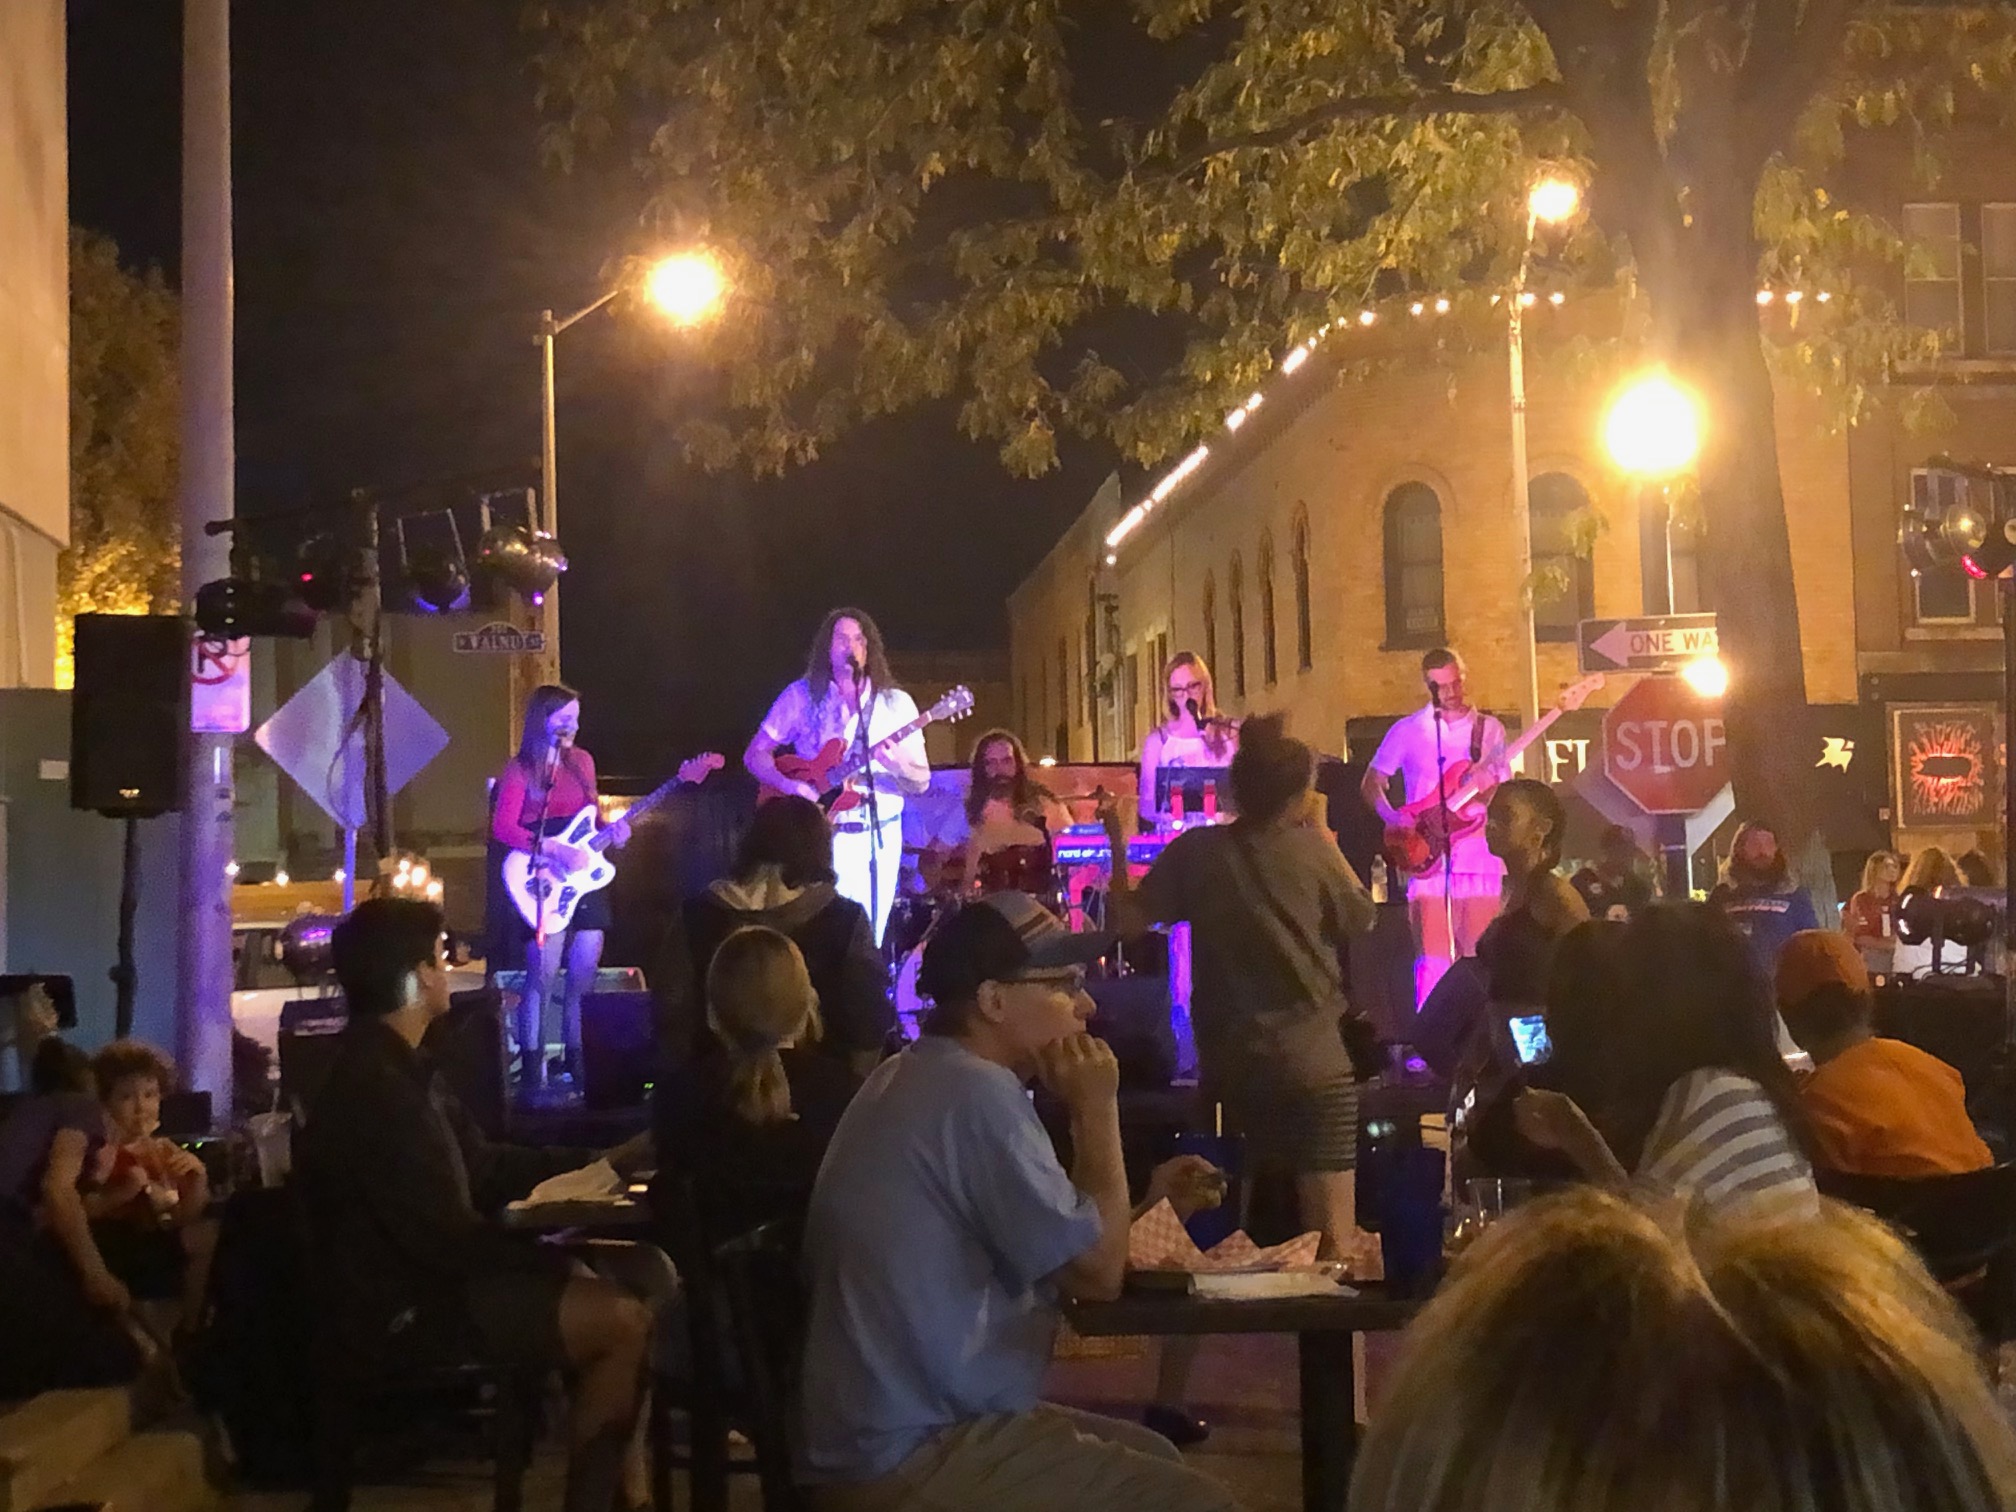 The band Modern Drugs is playing for an outdoor crowd at Toast to Taylor Street. Photo by Alyssa Buckley.